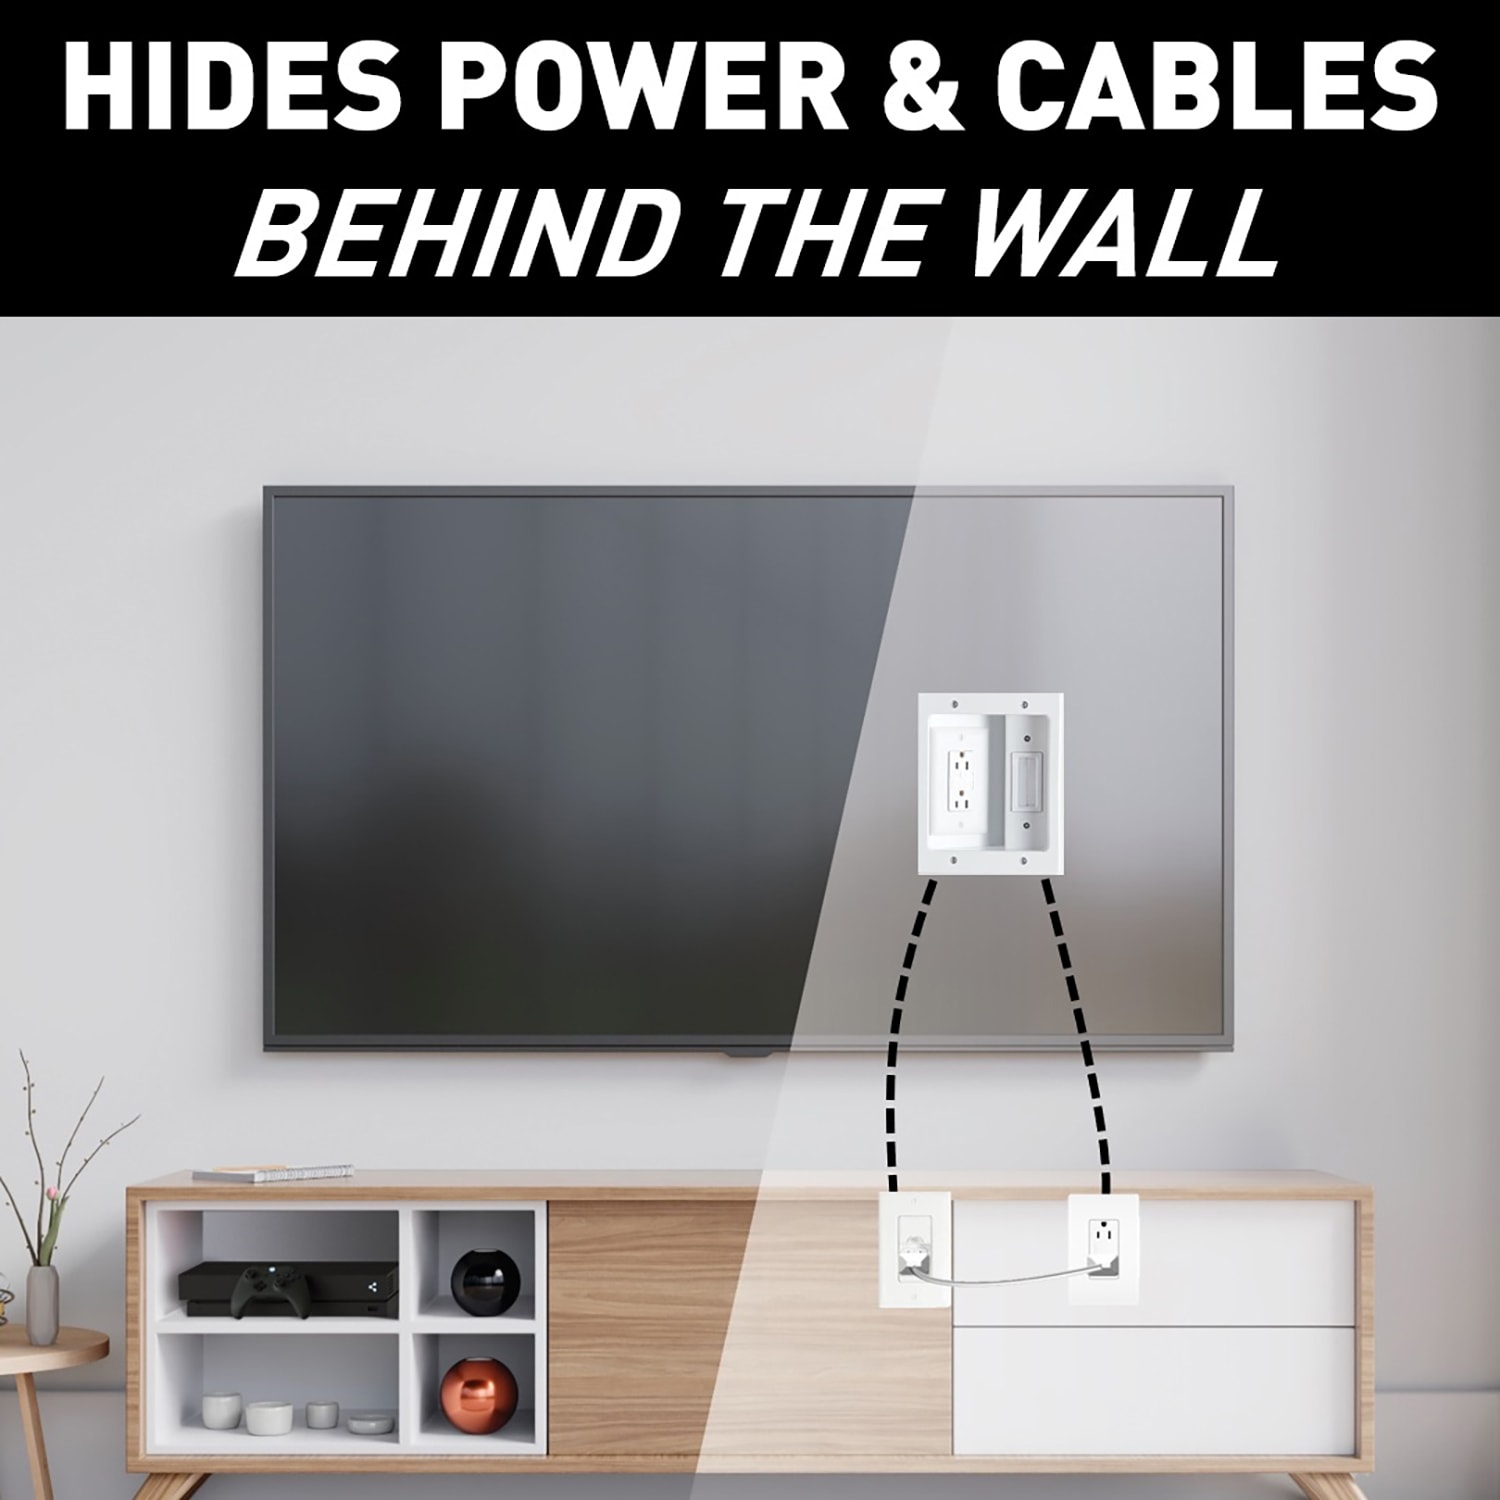 ECHOGEAR in-Wall TV & Soundbar Power Kit Safely Hides Cables Behind Your Wall - Includes Low Voltage Cable Managment to Conceal All TV & Soundbar